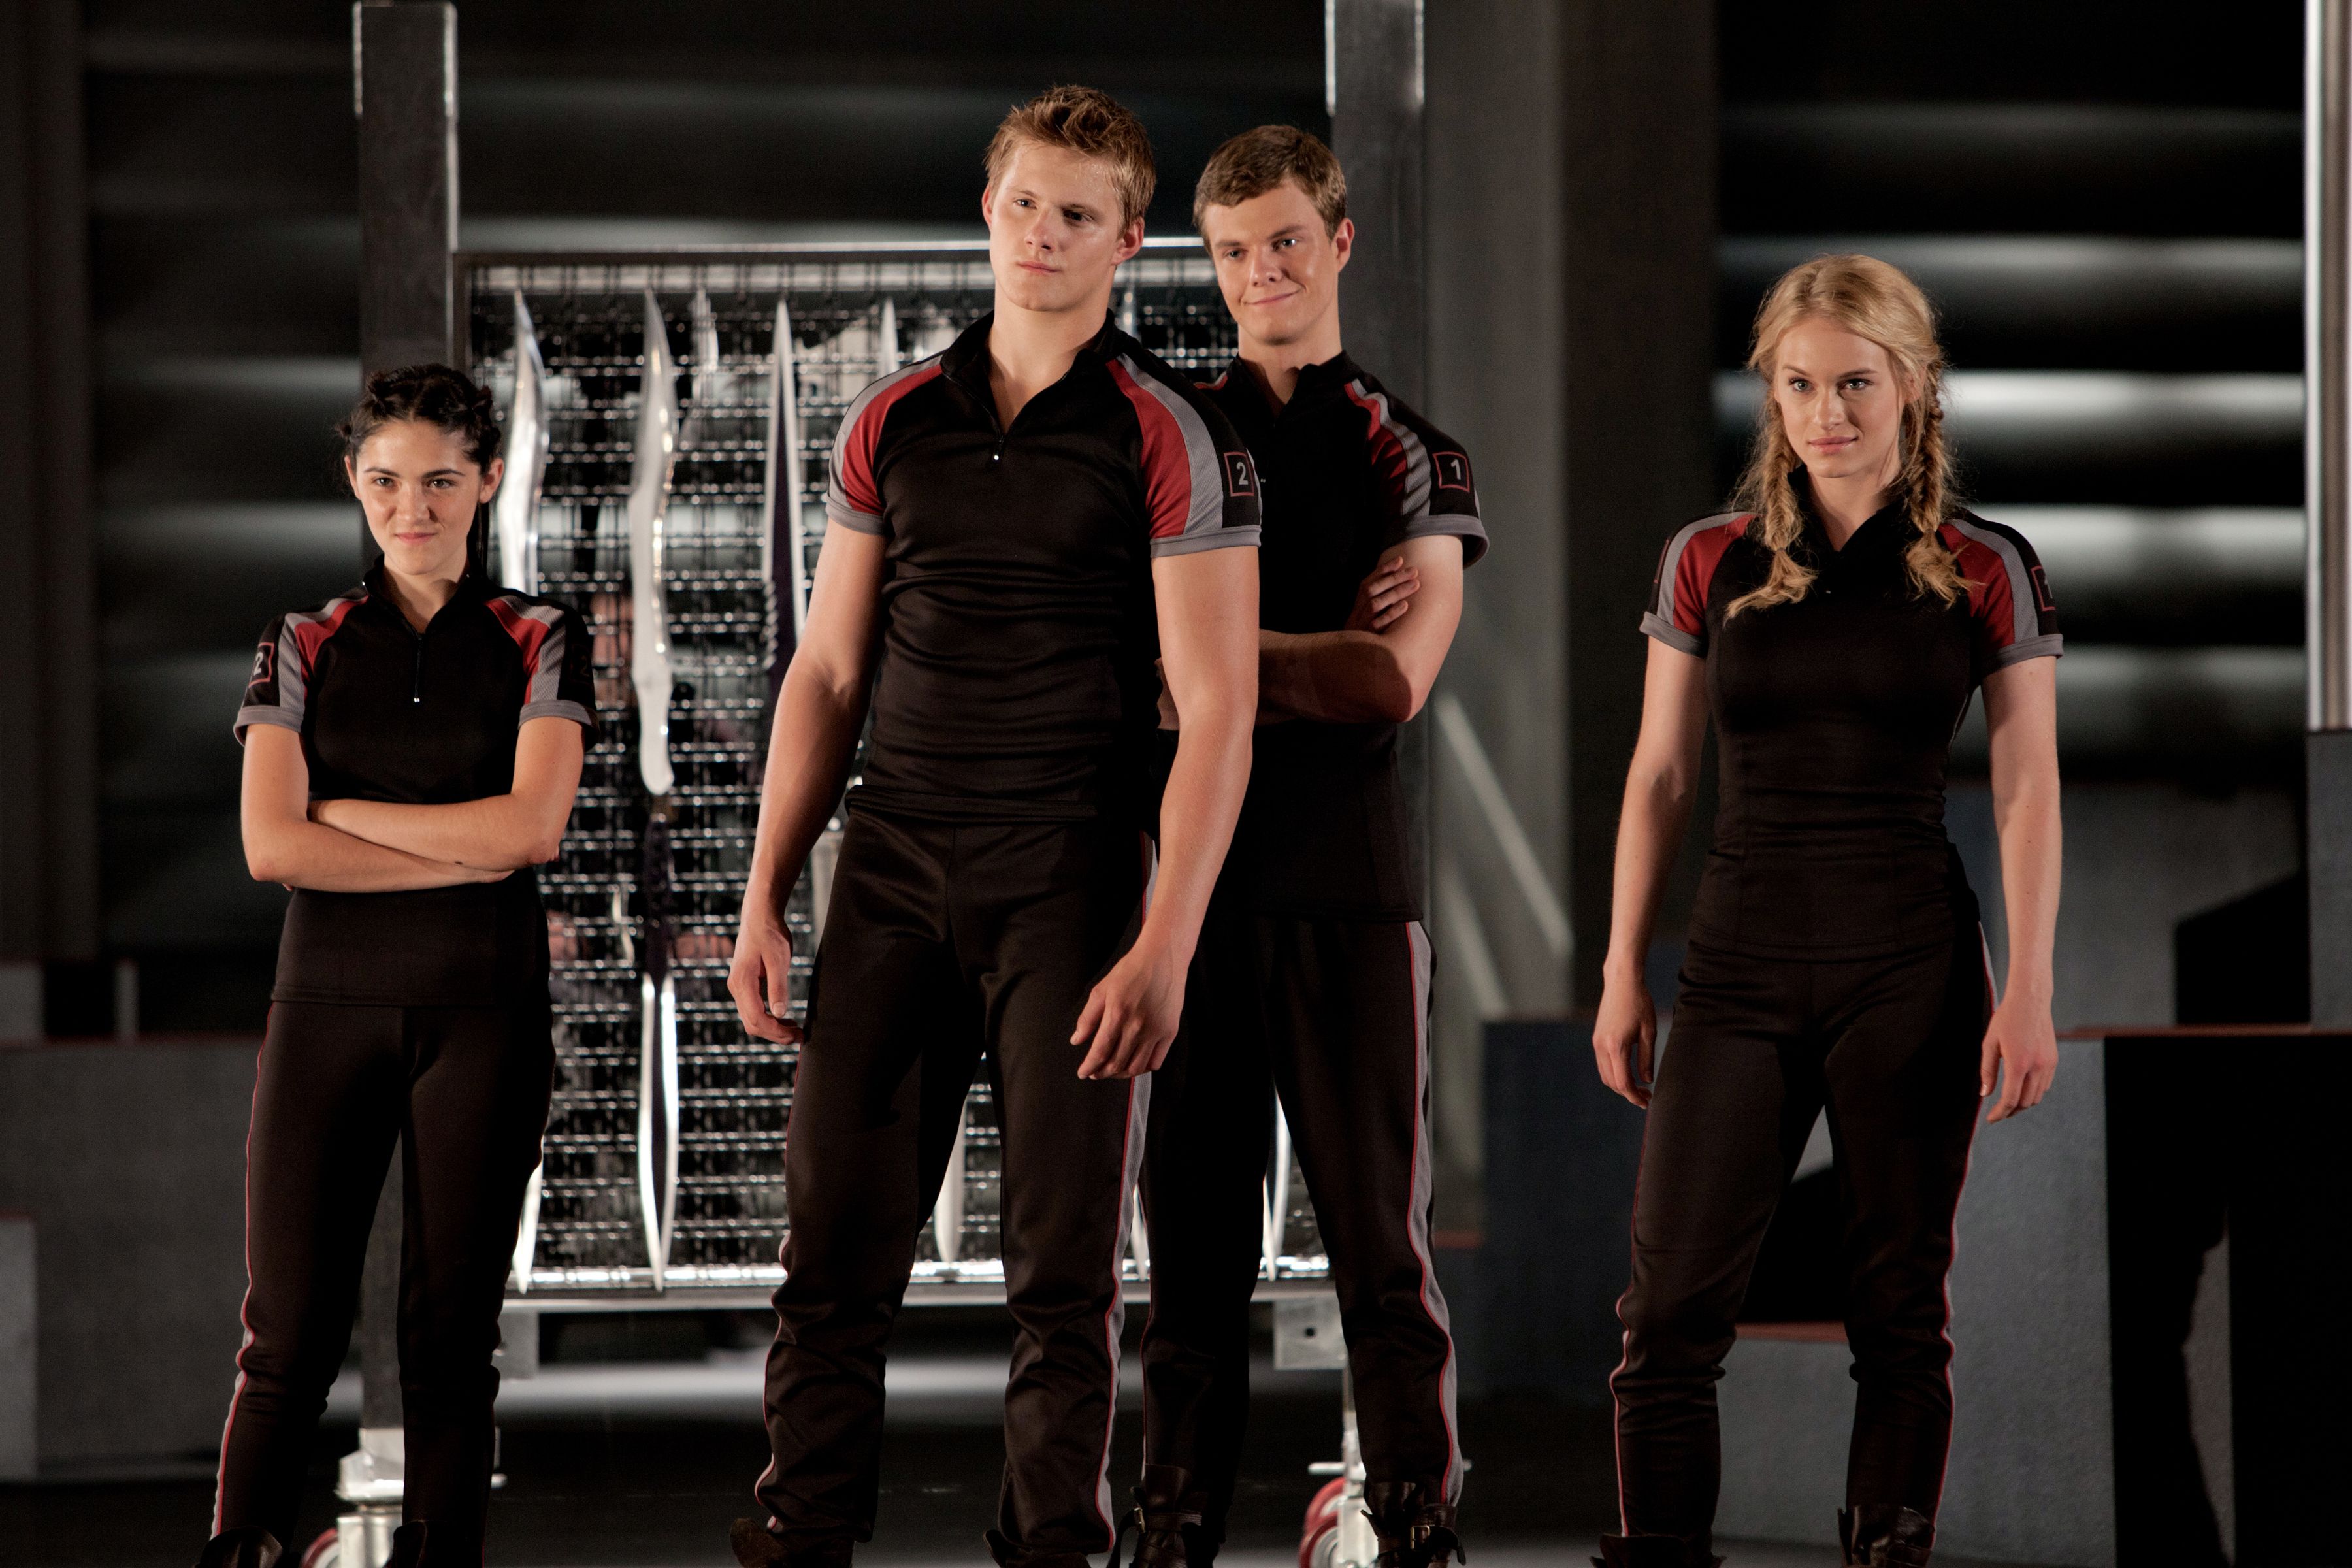 HQ 'Hunger Games' Image of The Tributes. The Hunger Games